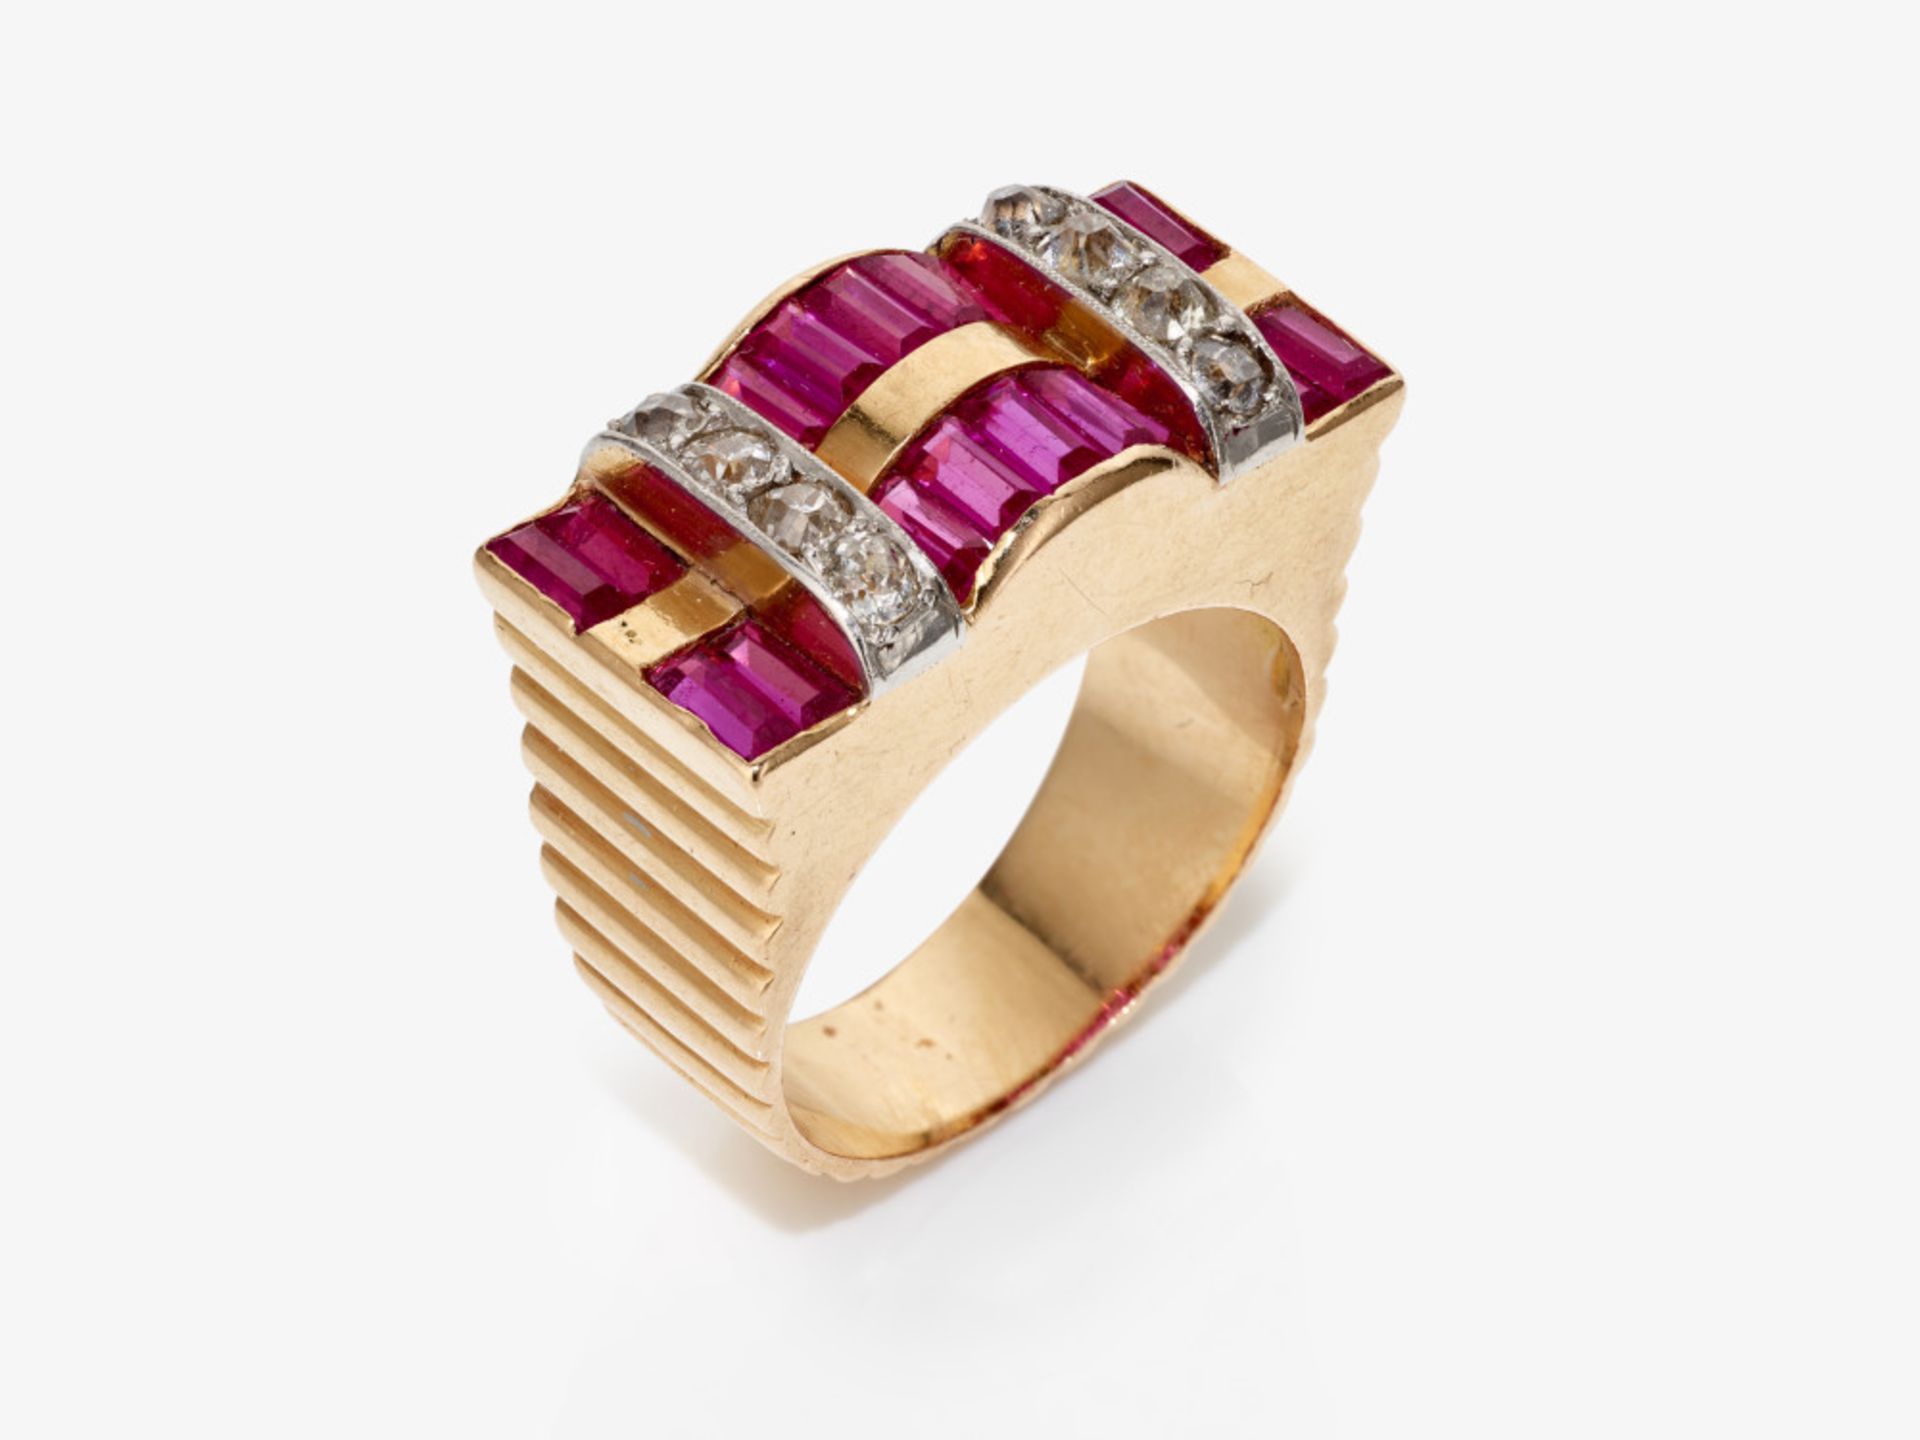 A ring with rubies and diamonds